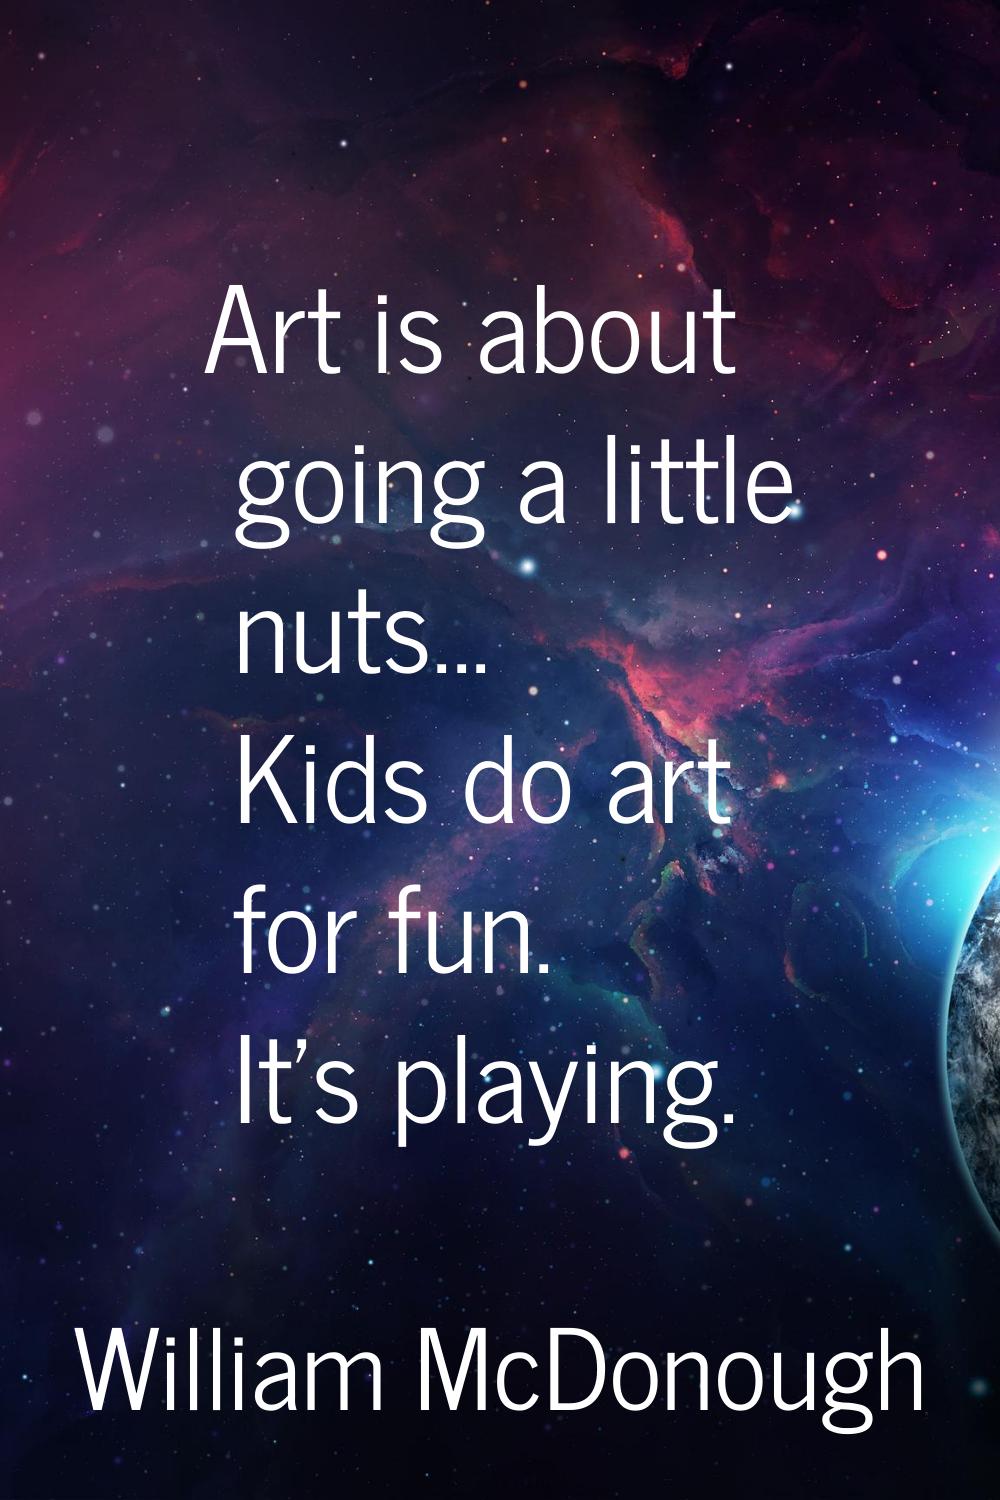 Art is about going a little nuts... Kids do art for fun. It's playing.